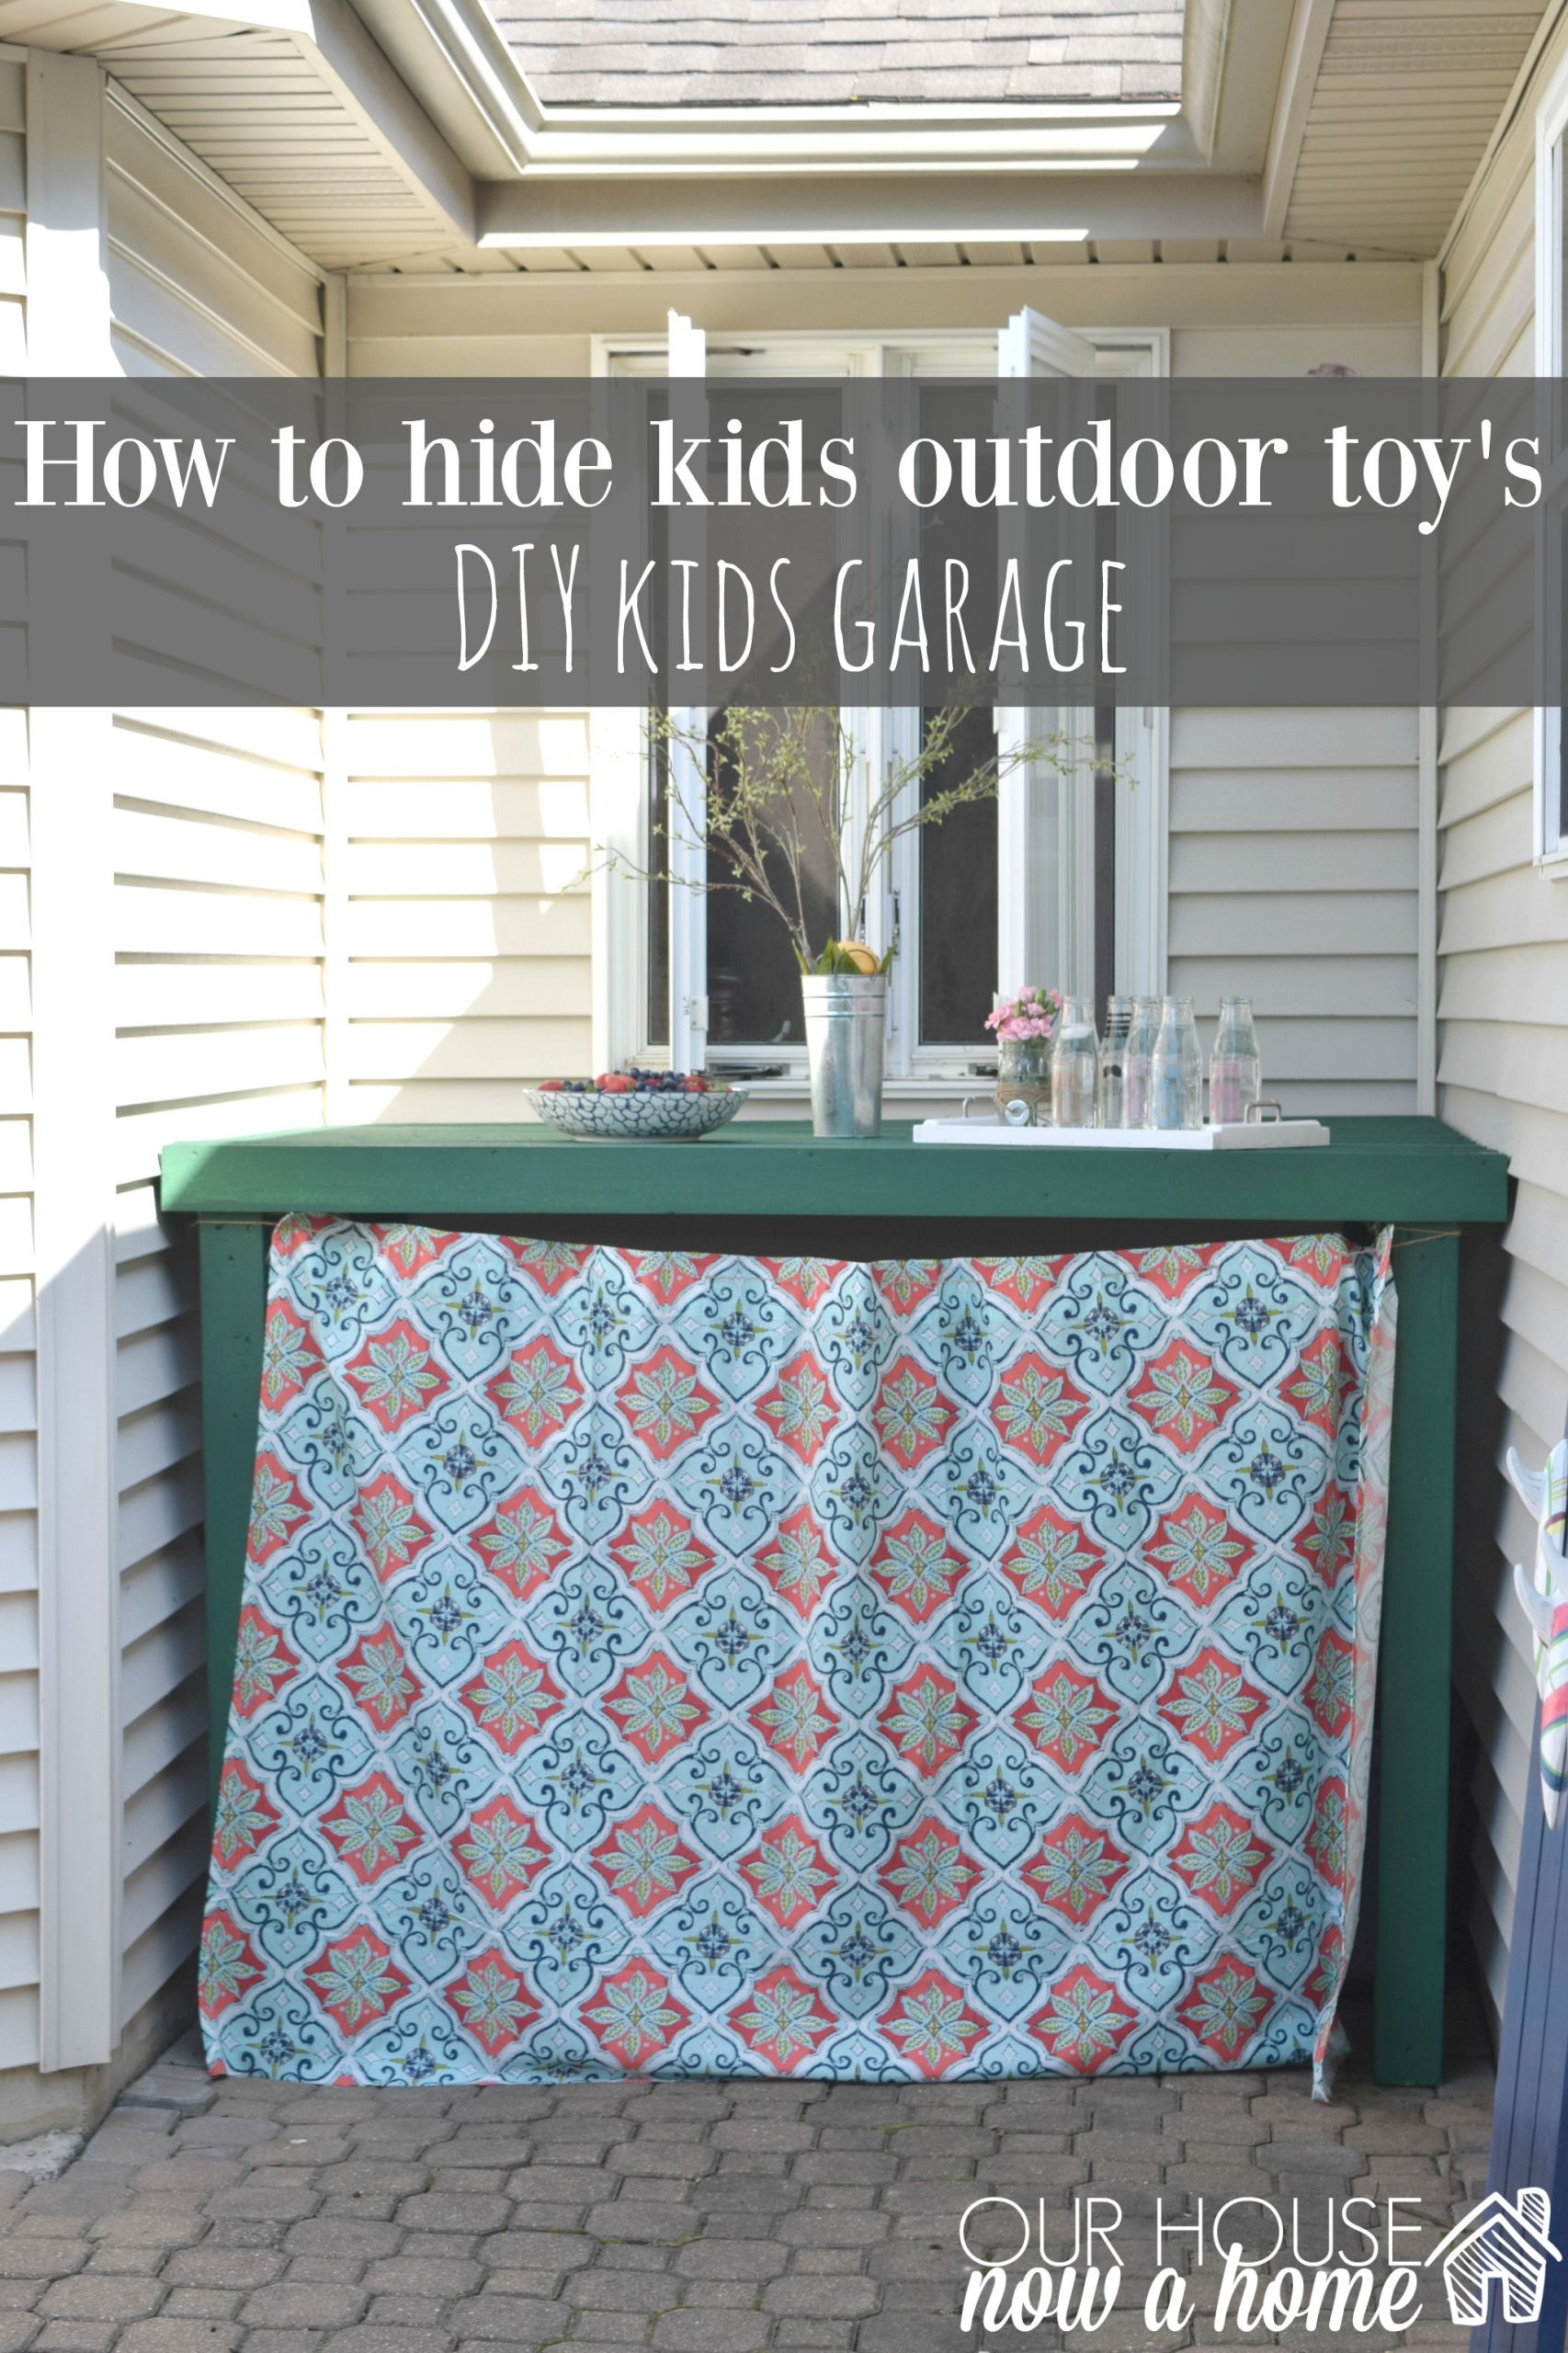 DIY Outdoor Toy Storage
 How to hide kids outdoor toys a DIY storage solution